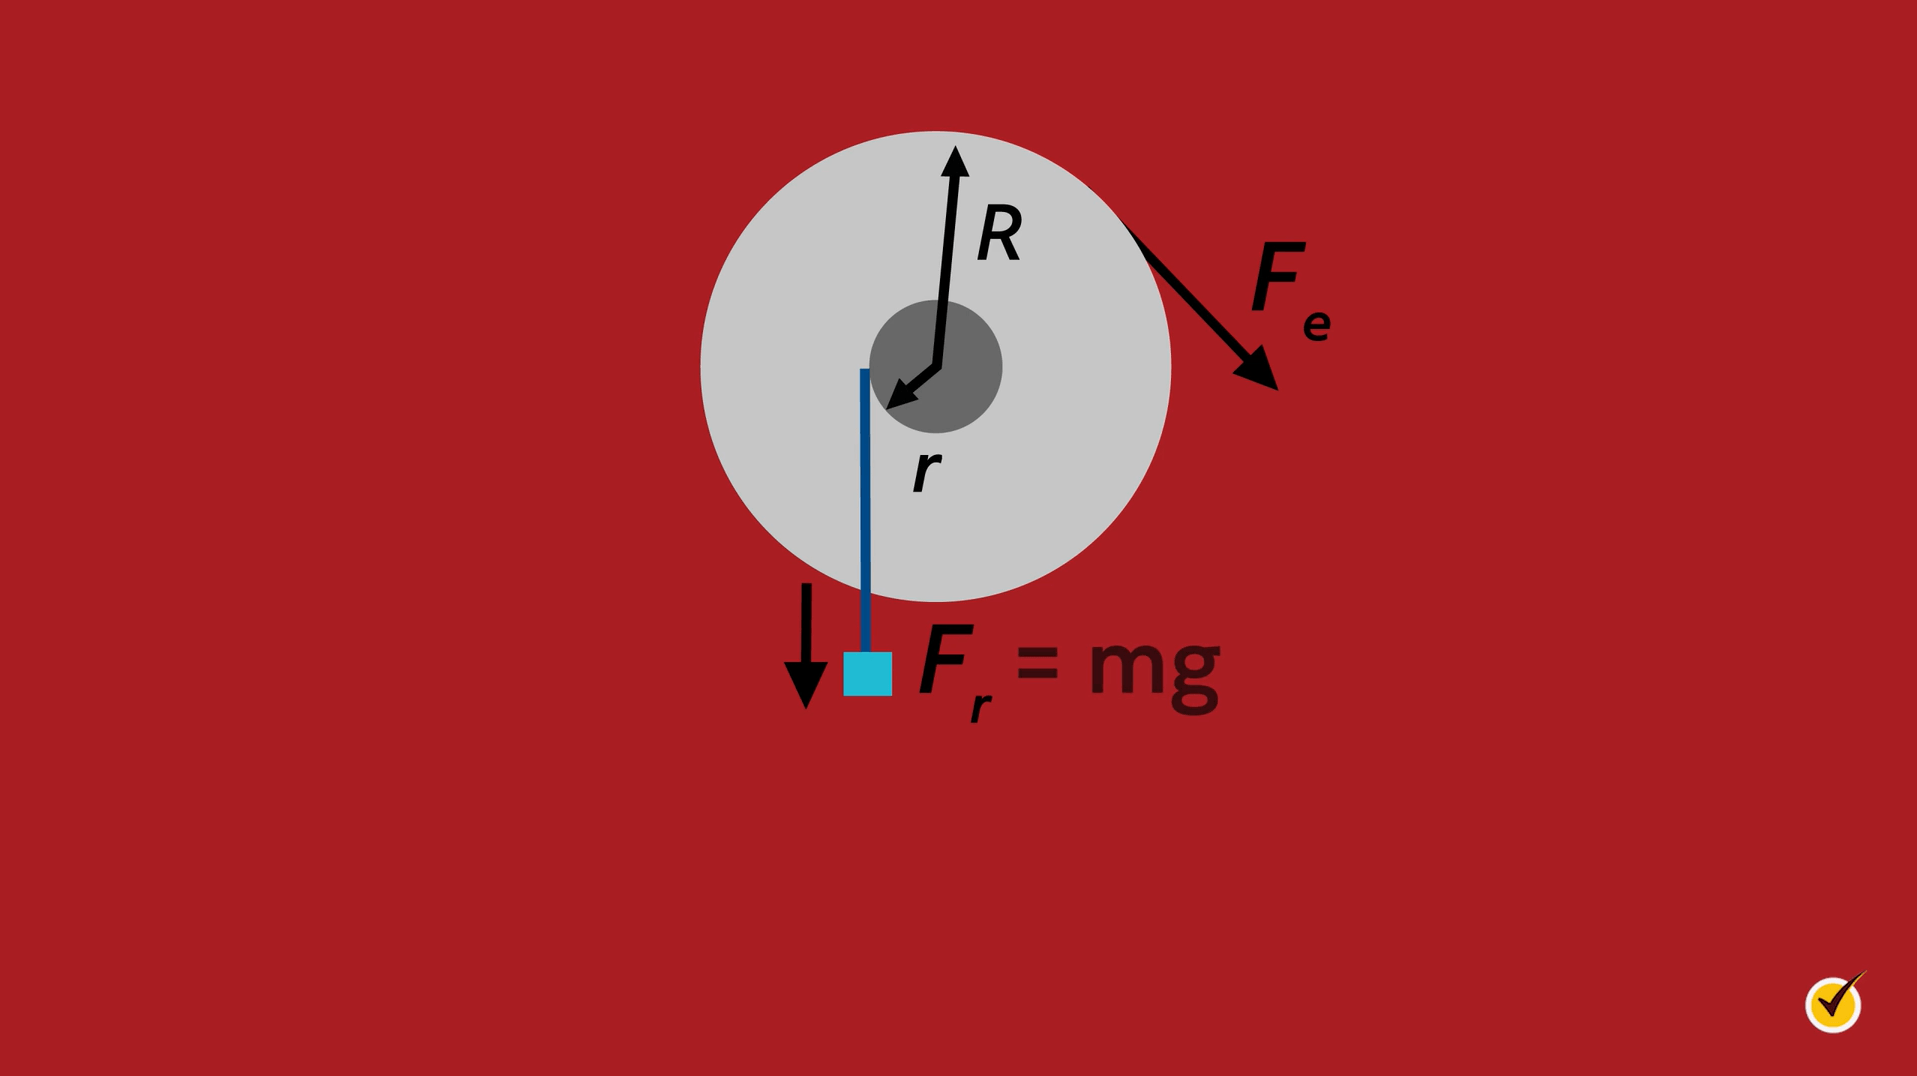 Example of wheel and axel forces: Fe points off right, R is an angled line with arrows, and the formula Fr=mg is written below. 